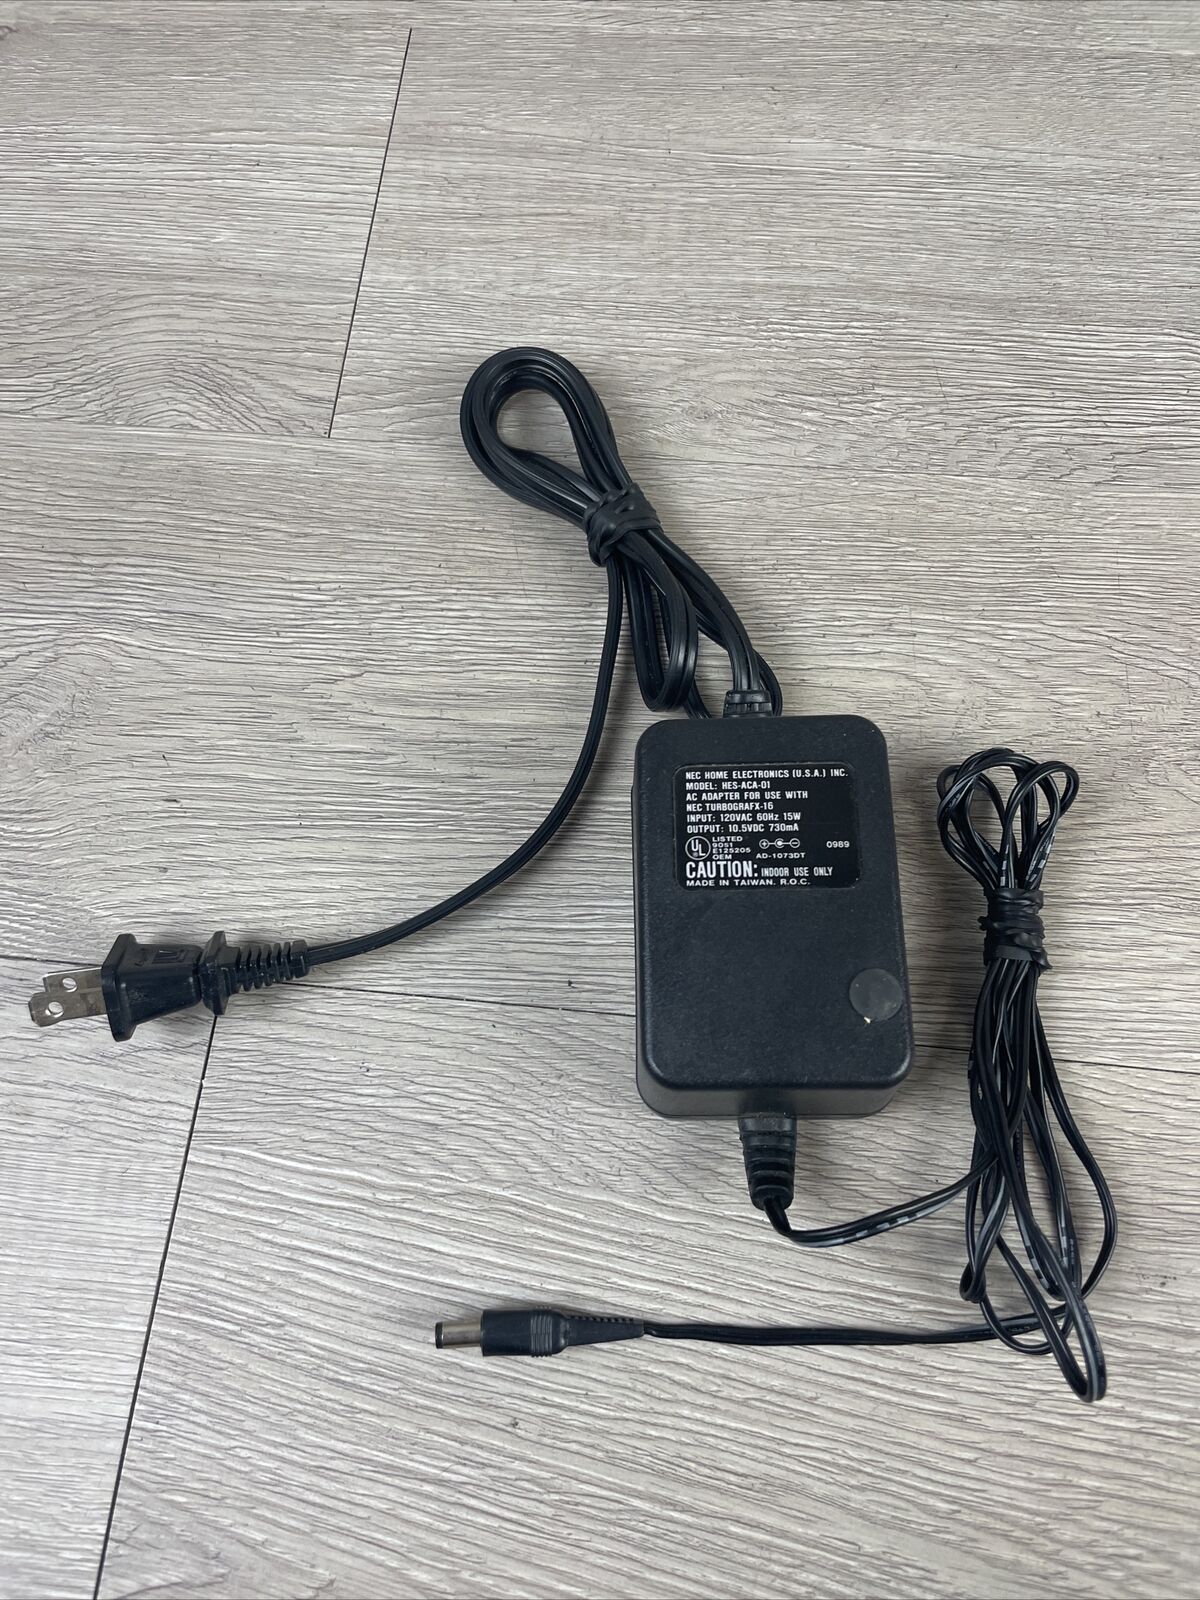 NEC Turbografx-16 CD AC Adapter Power Supply HES-ACA-01 Brand: NEC Compatible Brand: For NEC Type: Power Adapter MP